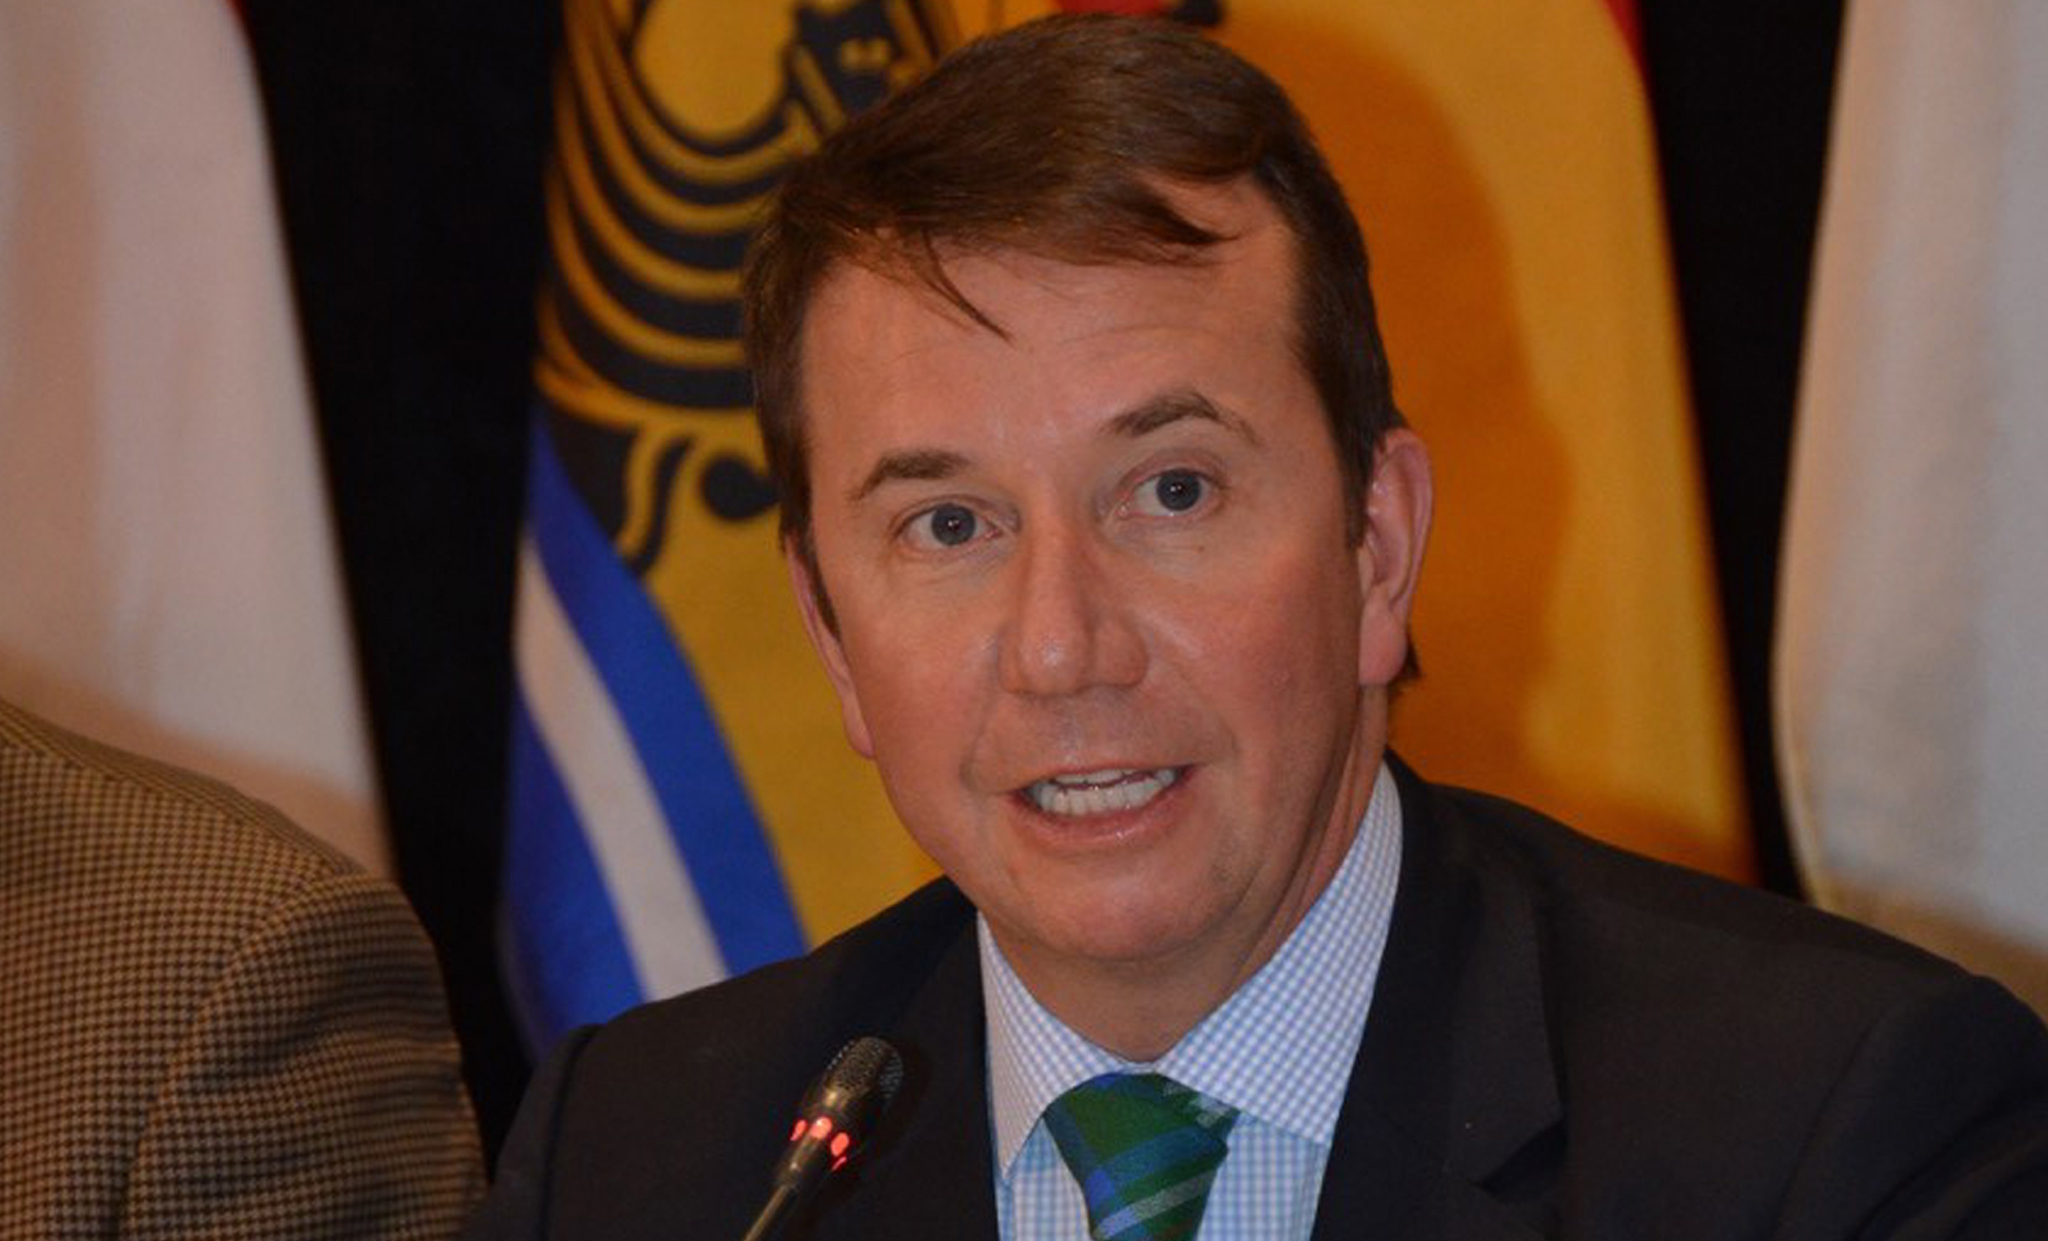 January 27, 2017 - The Honourable Scott Brison, President of the Treasury Board, speaks at a meeting of federal and provincial officials in Wolfville, Nova Scotia, to discuss progress on the Atlantic Growth Strategy.